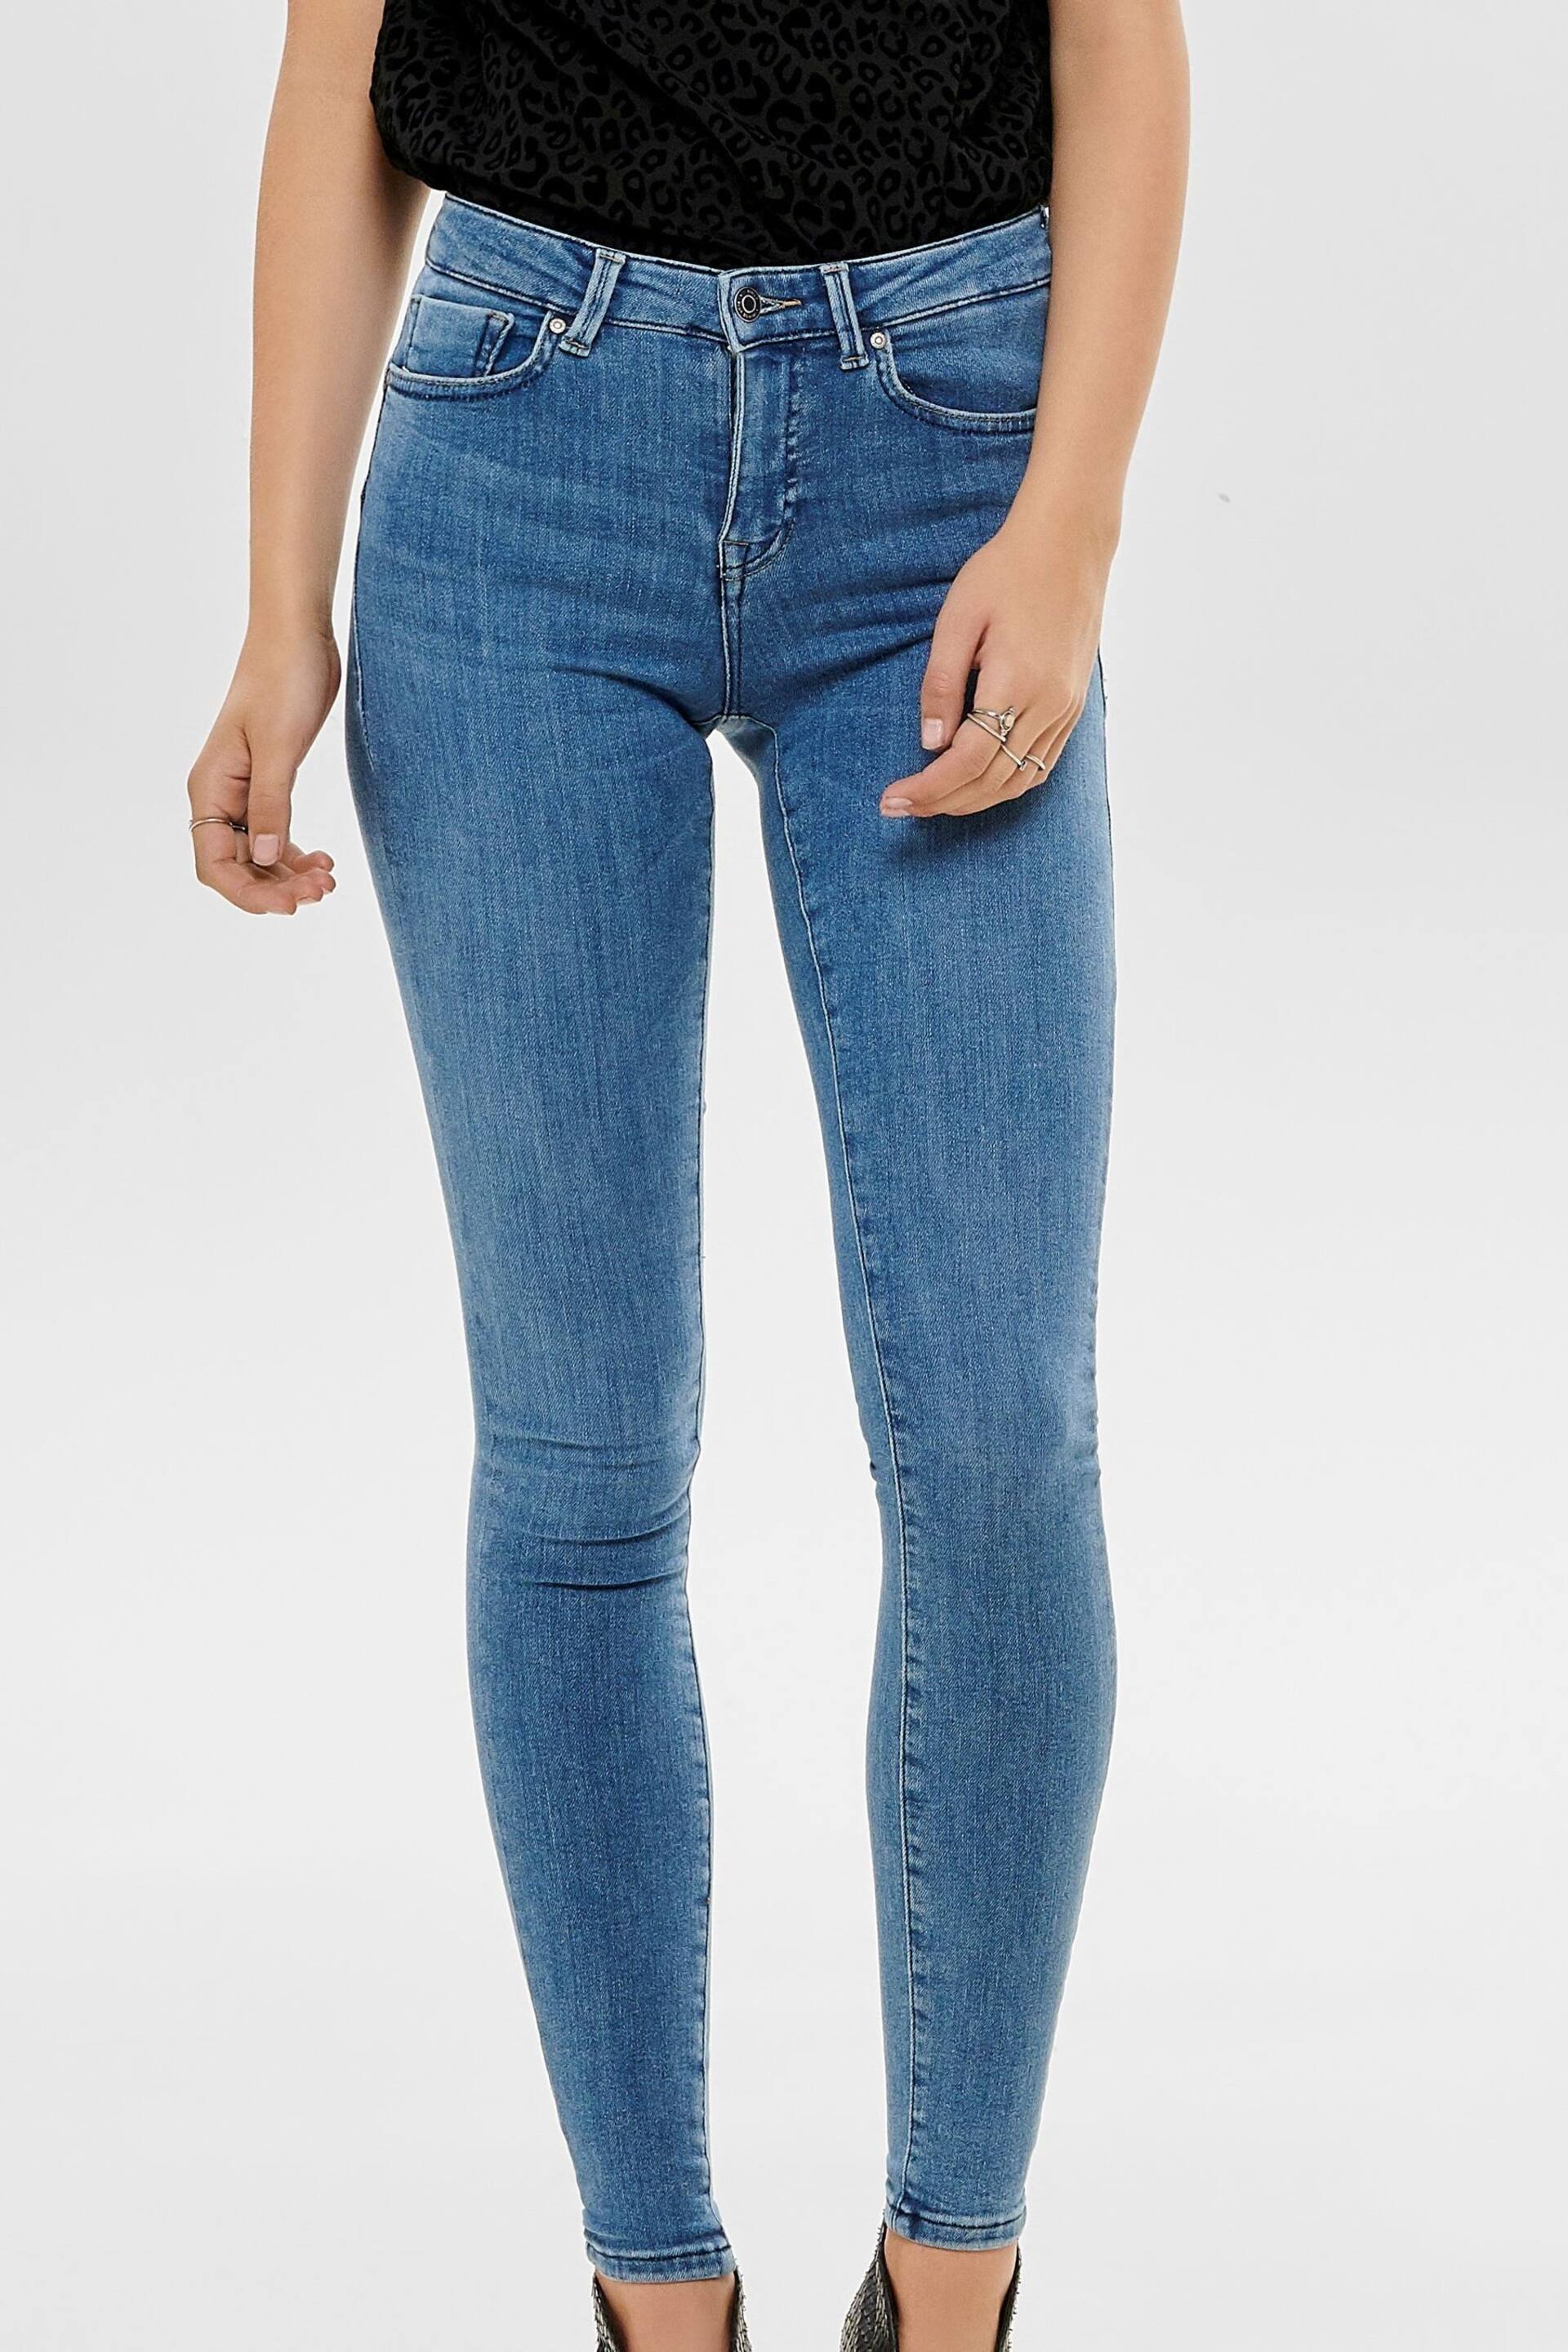 ONLY Blue Power Push Up Extra Skinny Jeans - Image 2 of 6